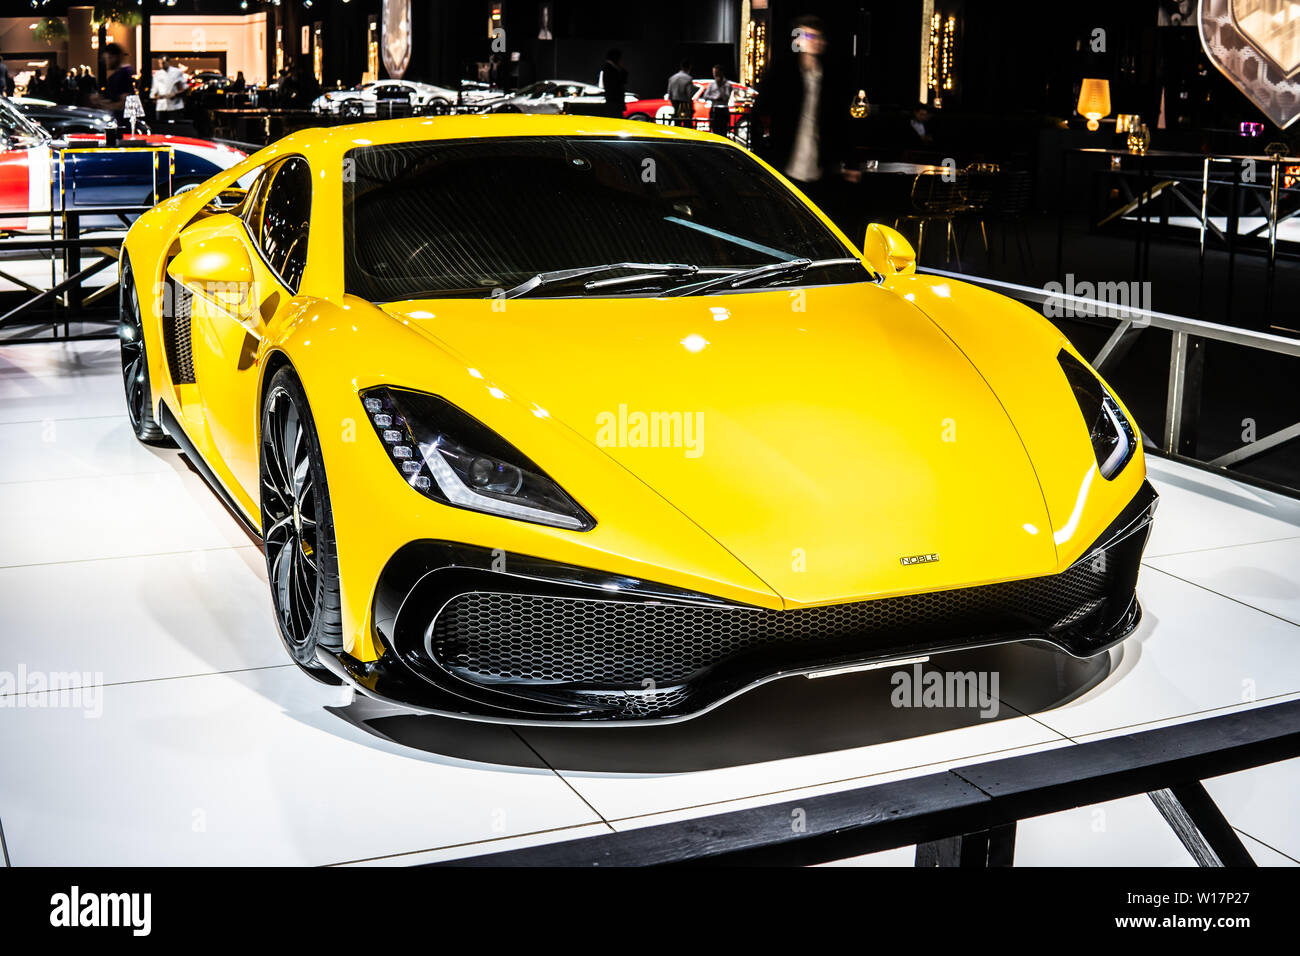 Brussels, Belgium, Jan 18, 2019: metallic yellow Noble M500 British supercar at Brussels Motor Show, produced by Noble Automotive Ltd Stock Photo